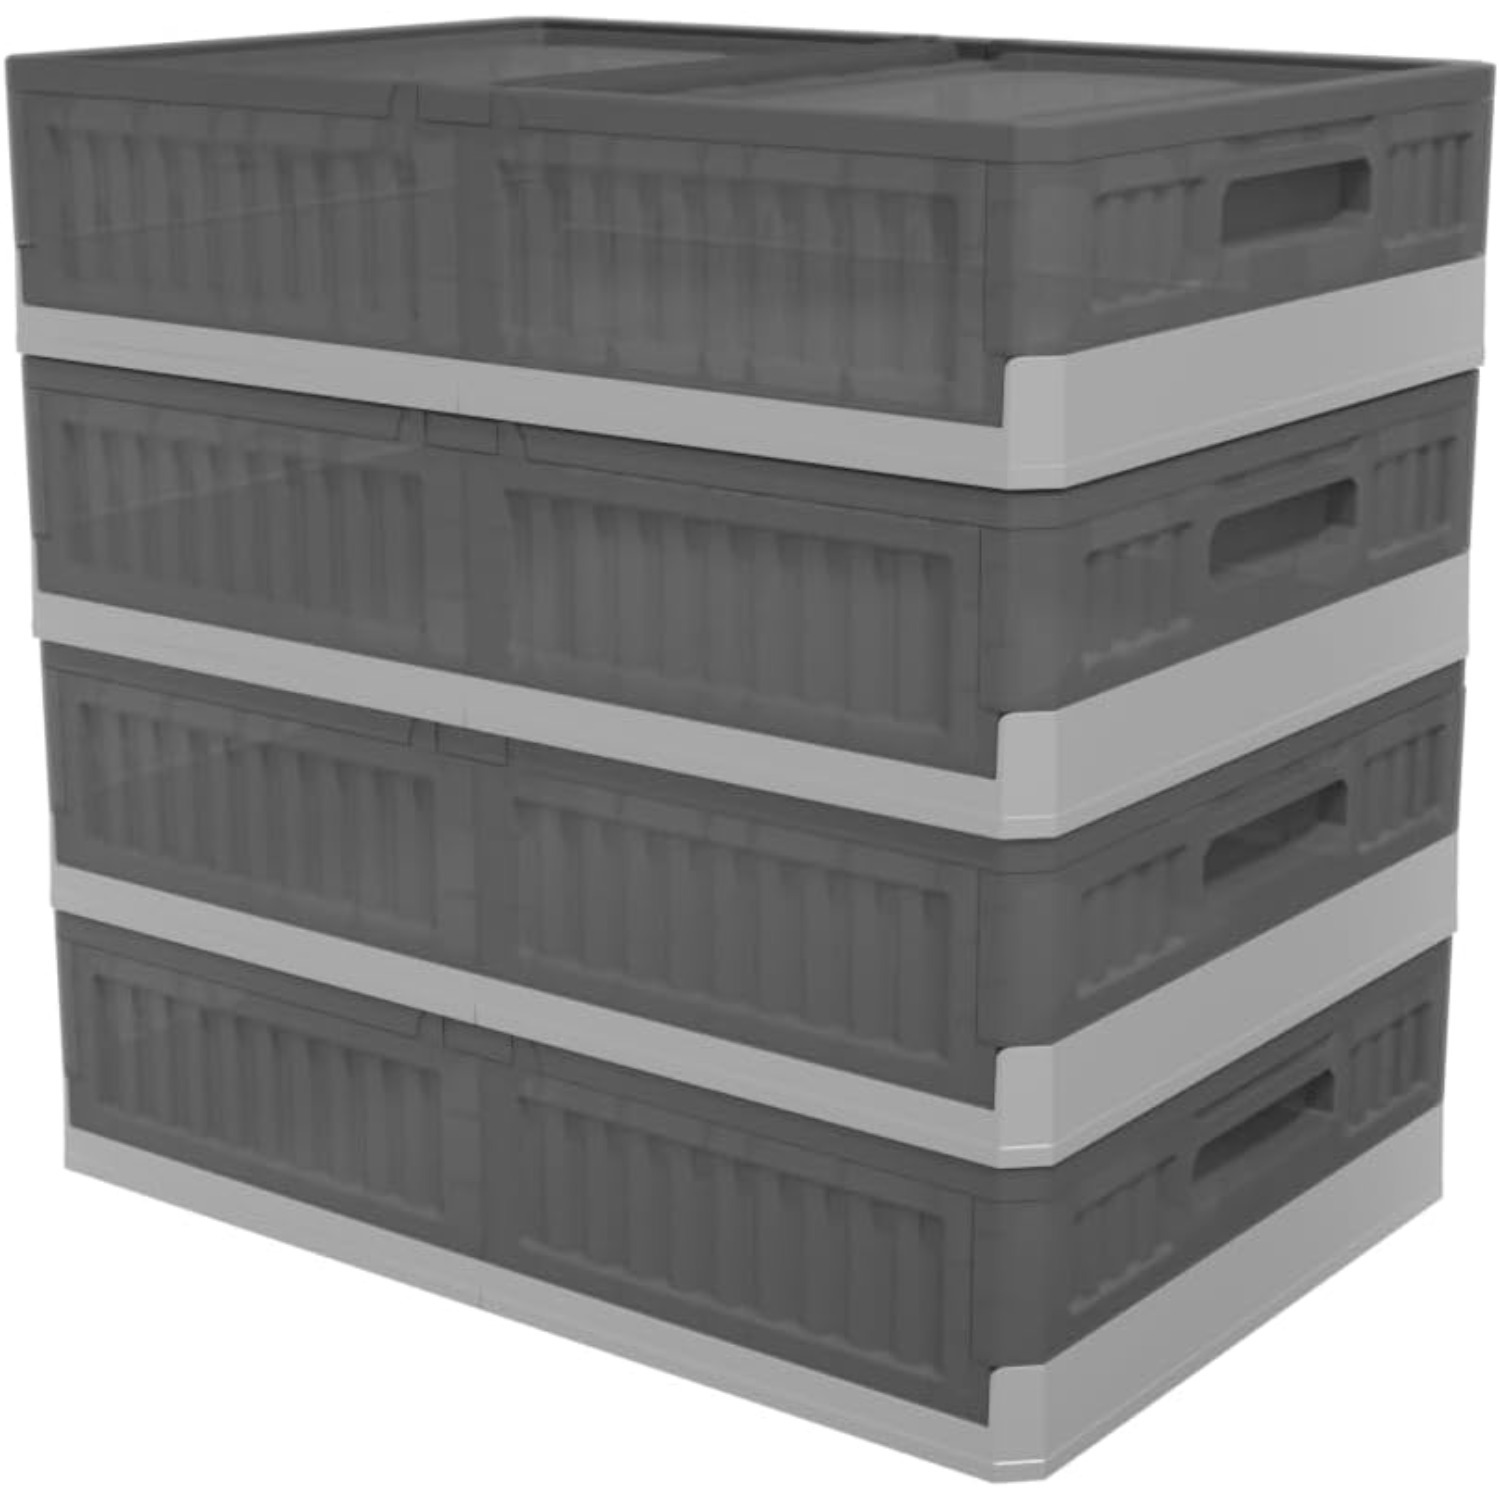 

Under Bed Storage Containers, Under Bed Storage With Wheels, Underbed Storage Bins For Closet And Under Sofa To Storing Clothes, Quilts, Shoes, And Bedding, Stackable Bins